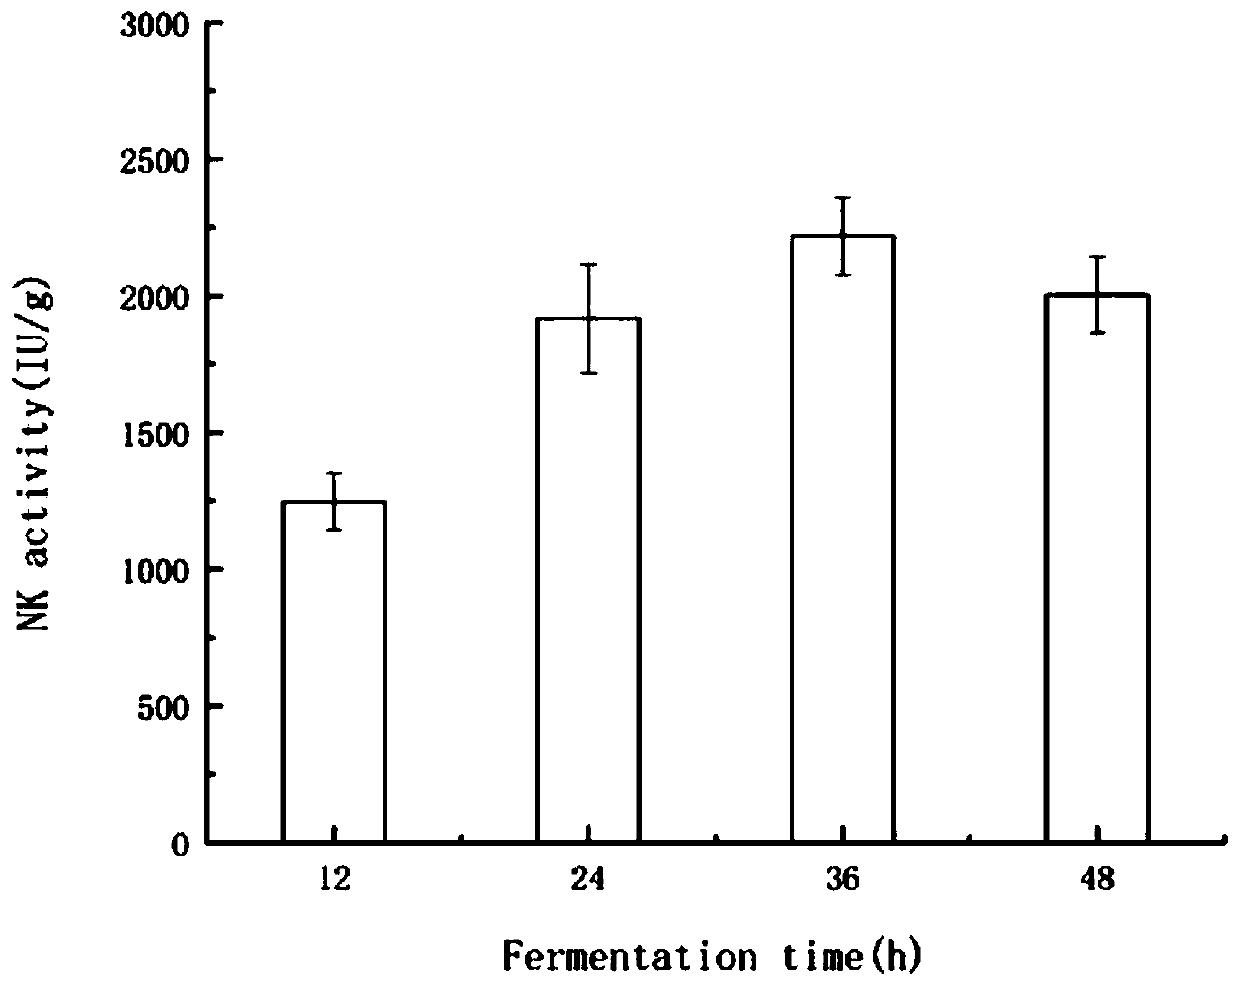 Method for fermenting vegetable soybeans and other foreign products by bacillus natto to produce nattokinase